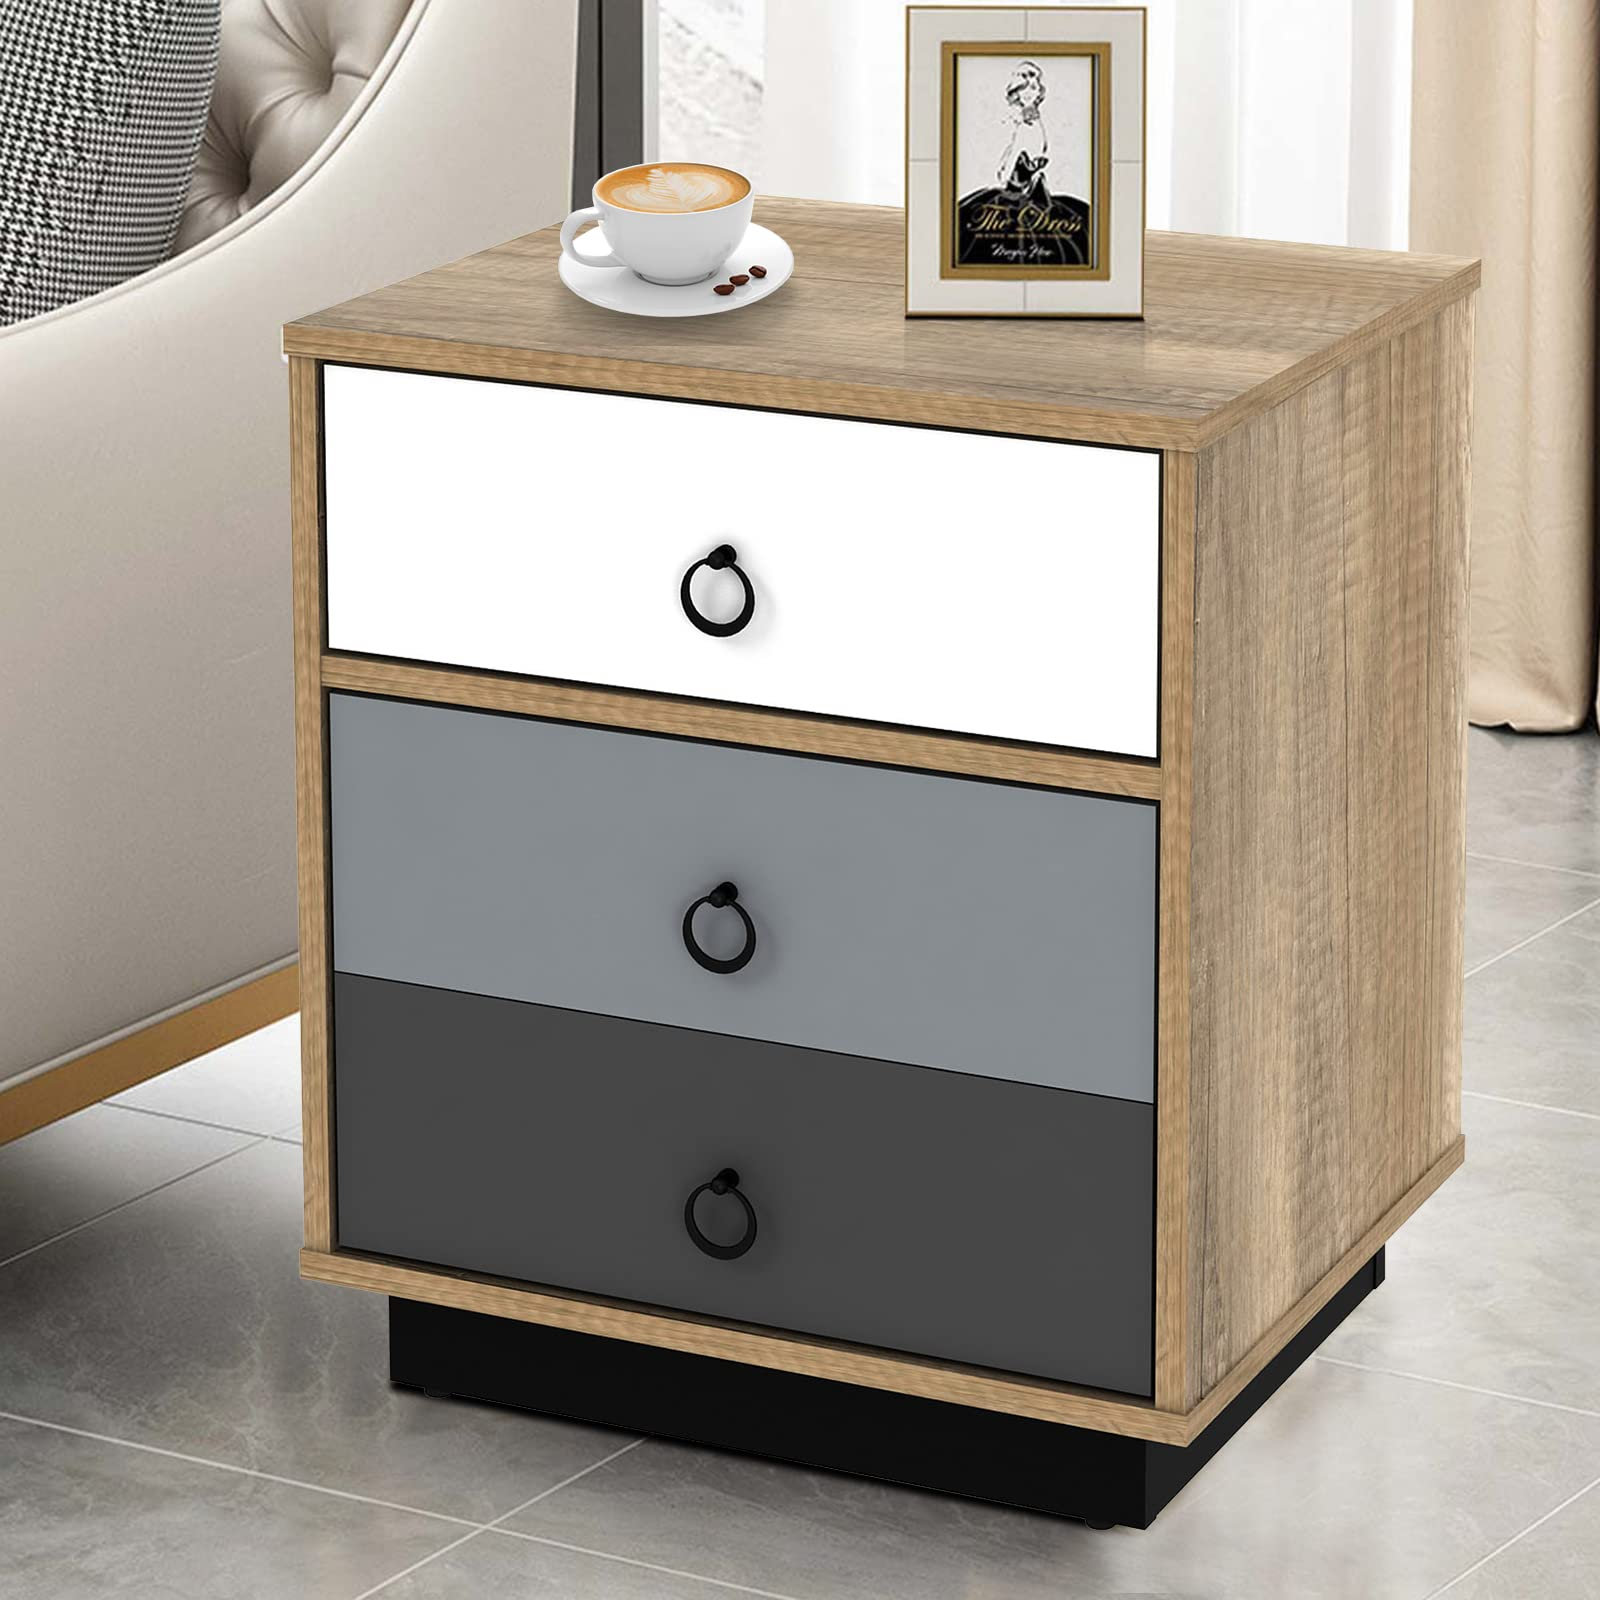 Giantex Nightstand, End Table with Drawer and Storage Cabinet, Bedside Table with Large Capacity